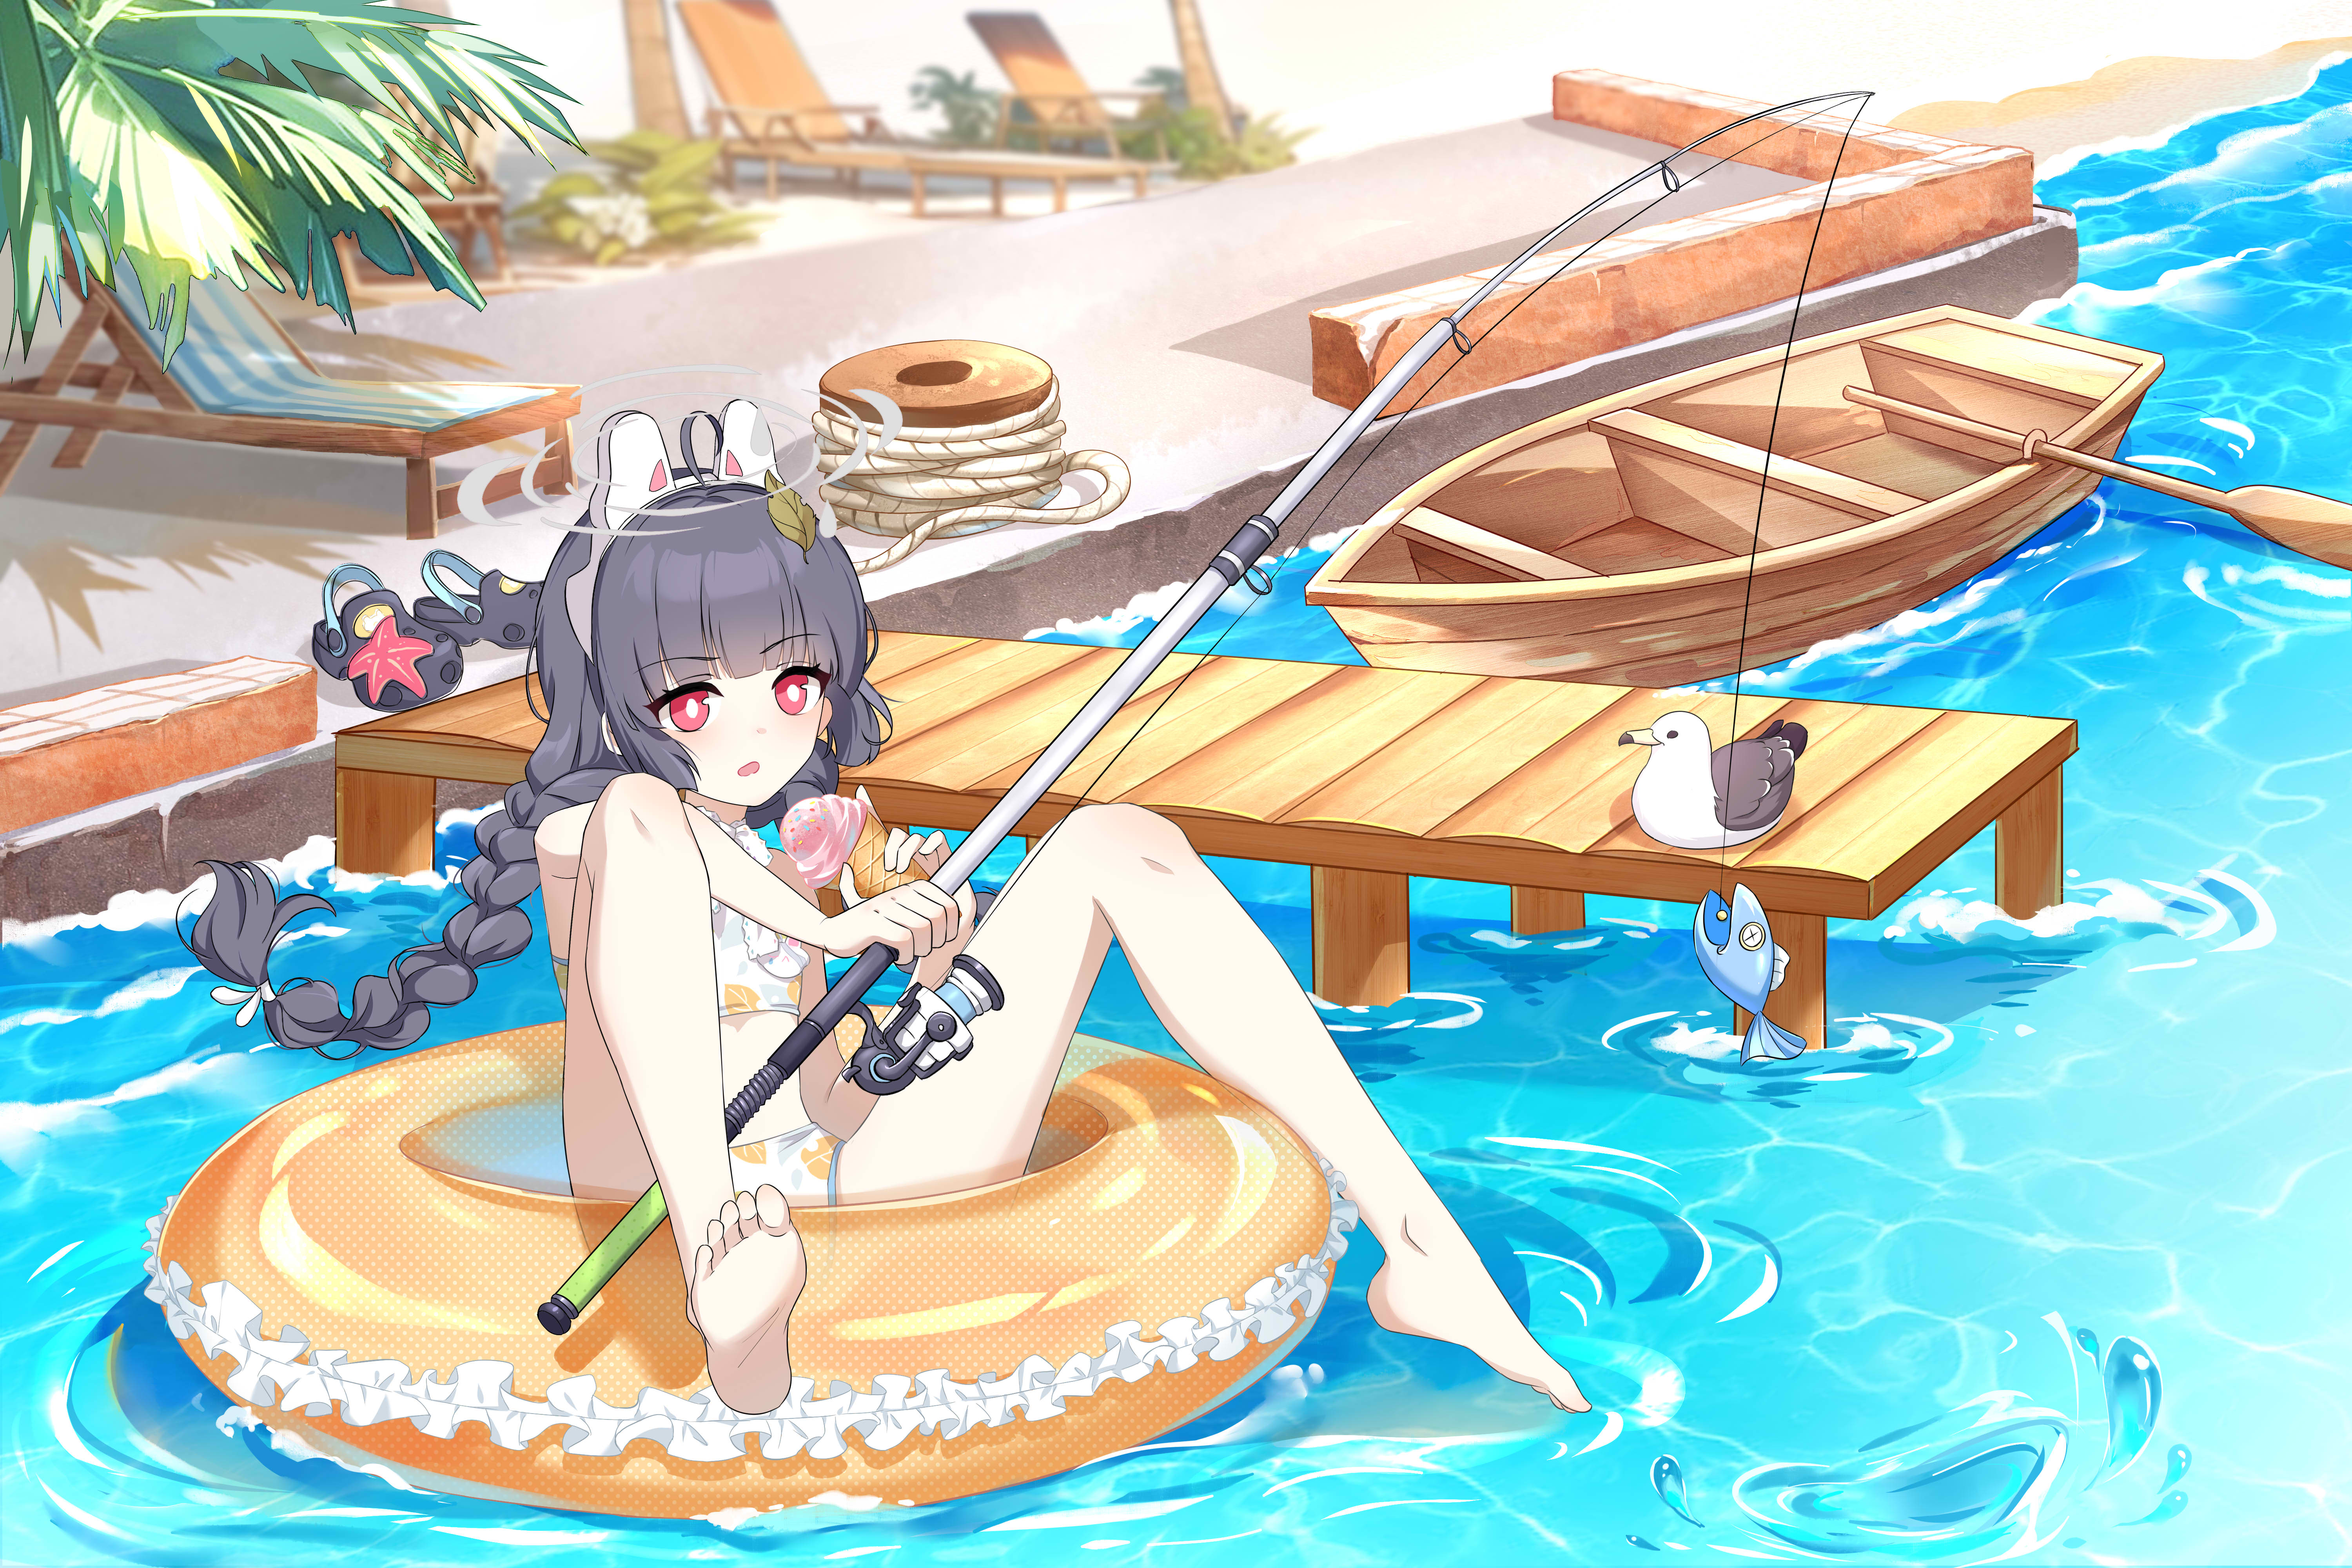 Anime 6000x4000 Blue Archive anime girls anime games long hair dark hair red eyes fishing swimwear Miyu Kasumizawa beach braids ice cream seagulls ting tao soul video game characters feet fishing rod bent legs foot sole pointed toes water jetty boat ropes spread legs open mouth bangs fist birds animals